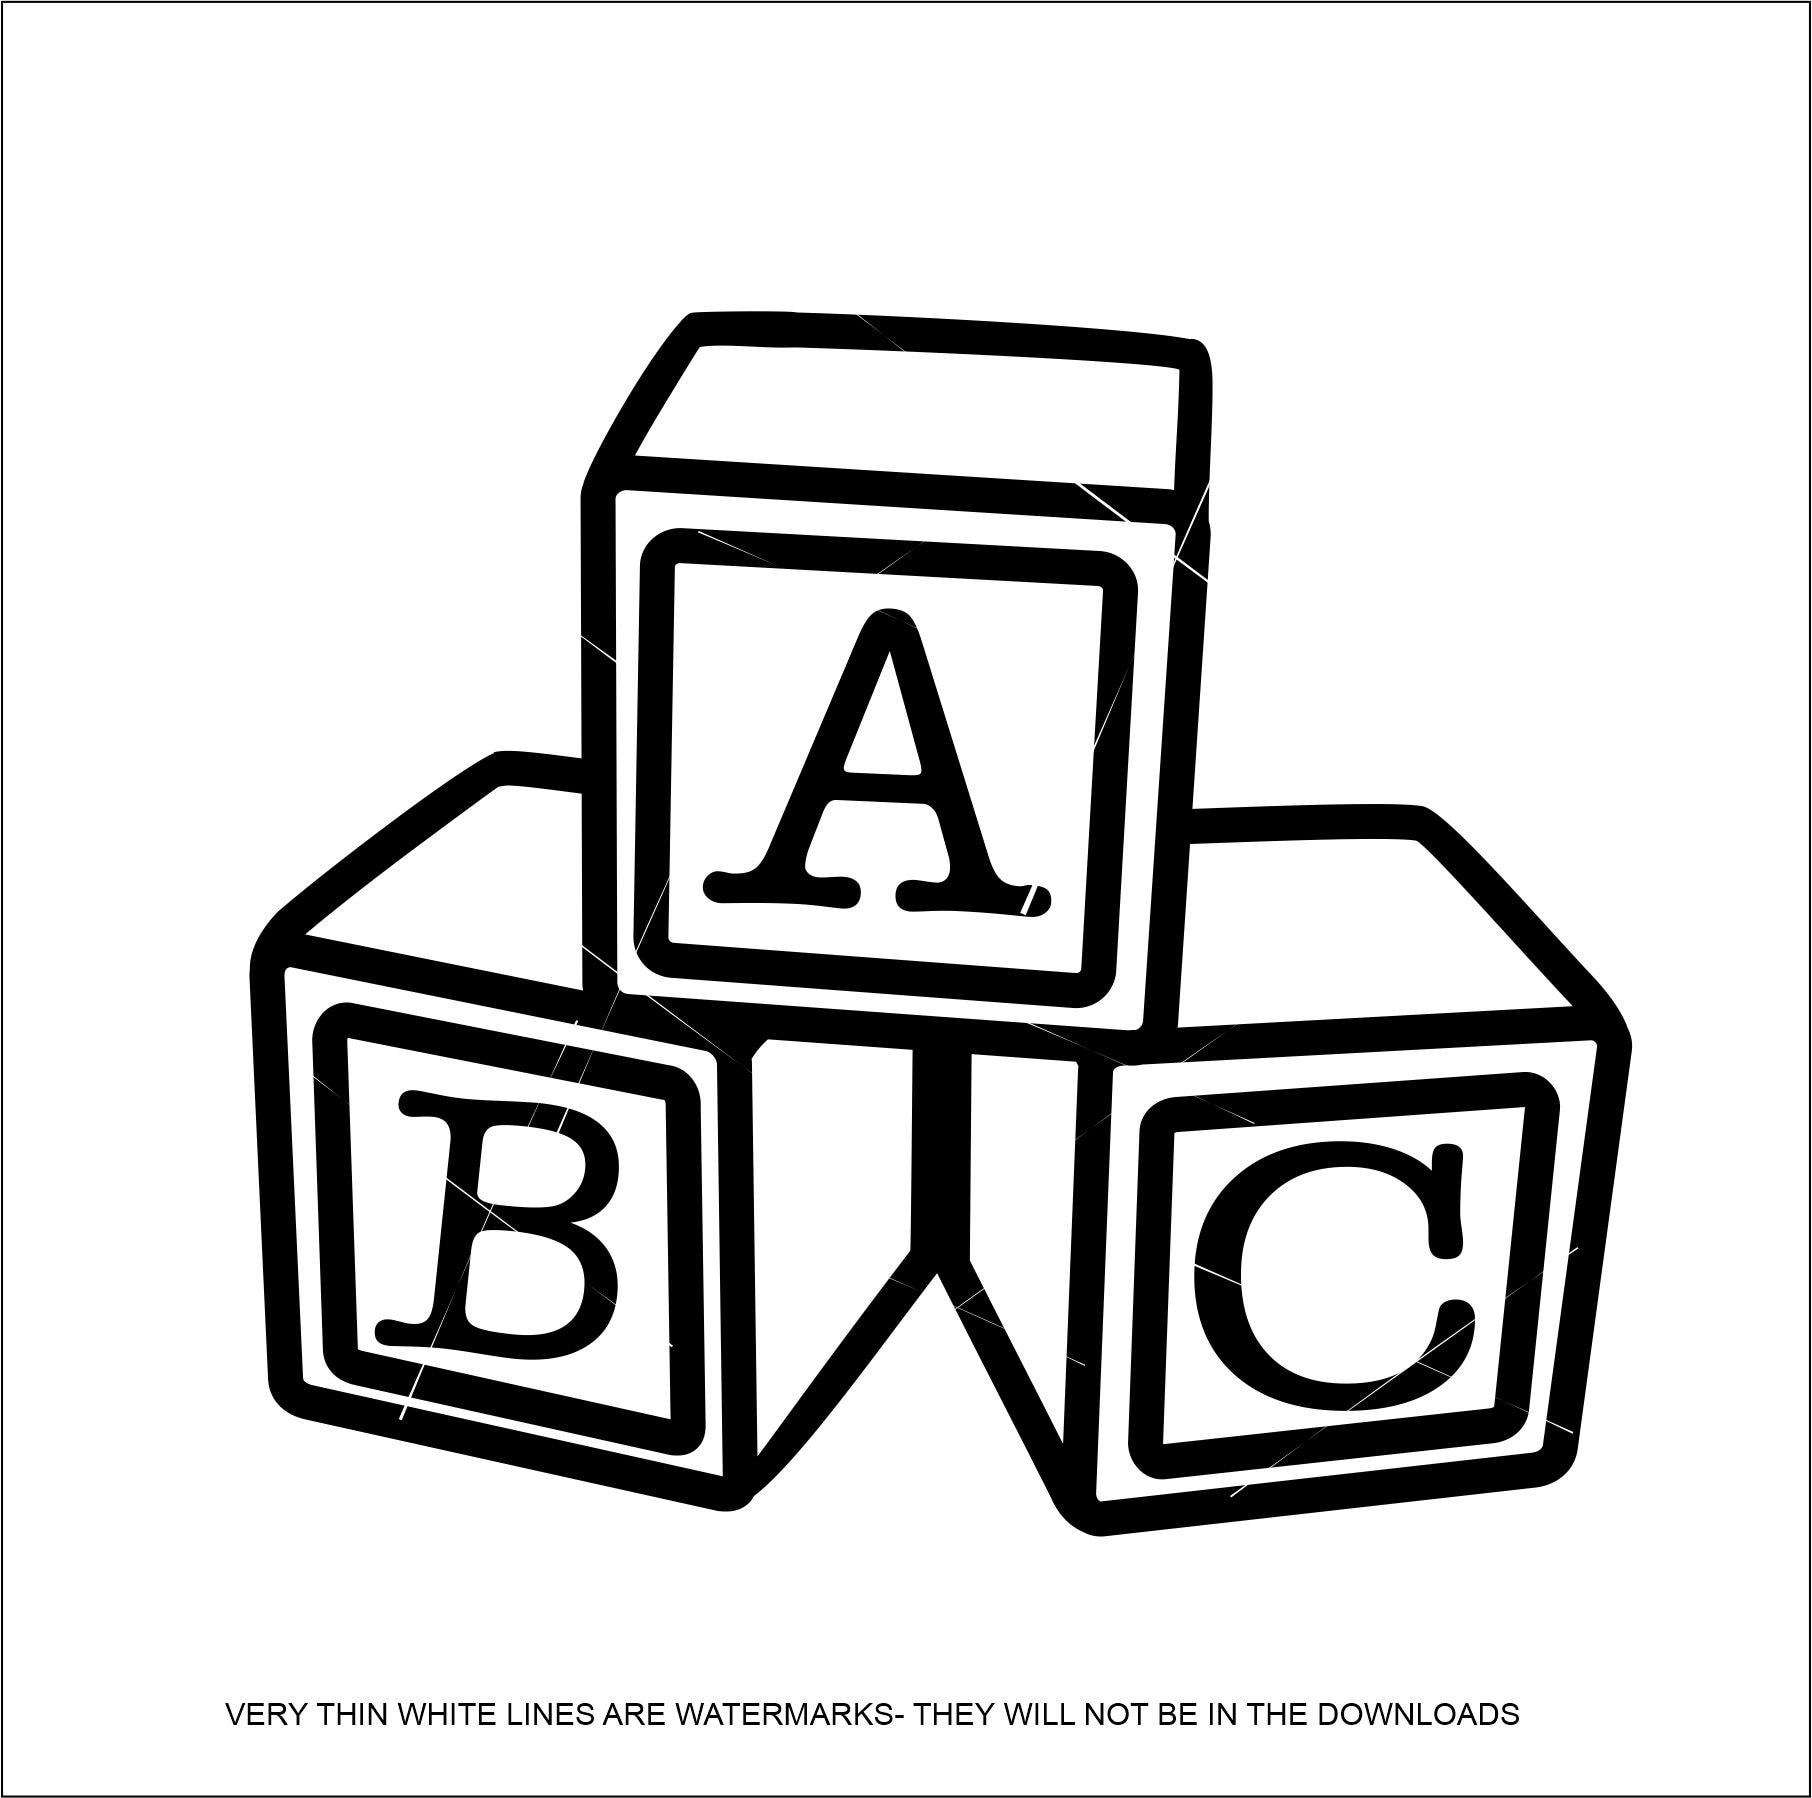 Abc Blocks Coloring Pages